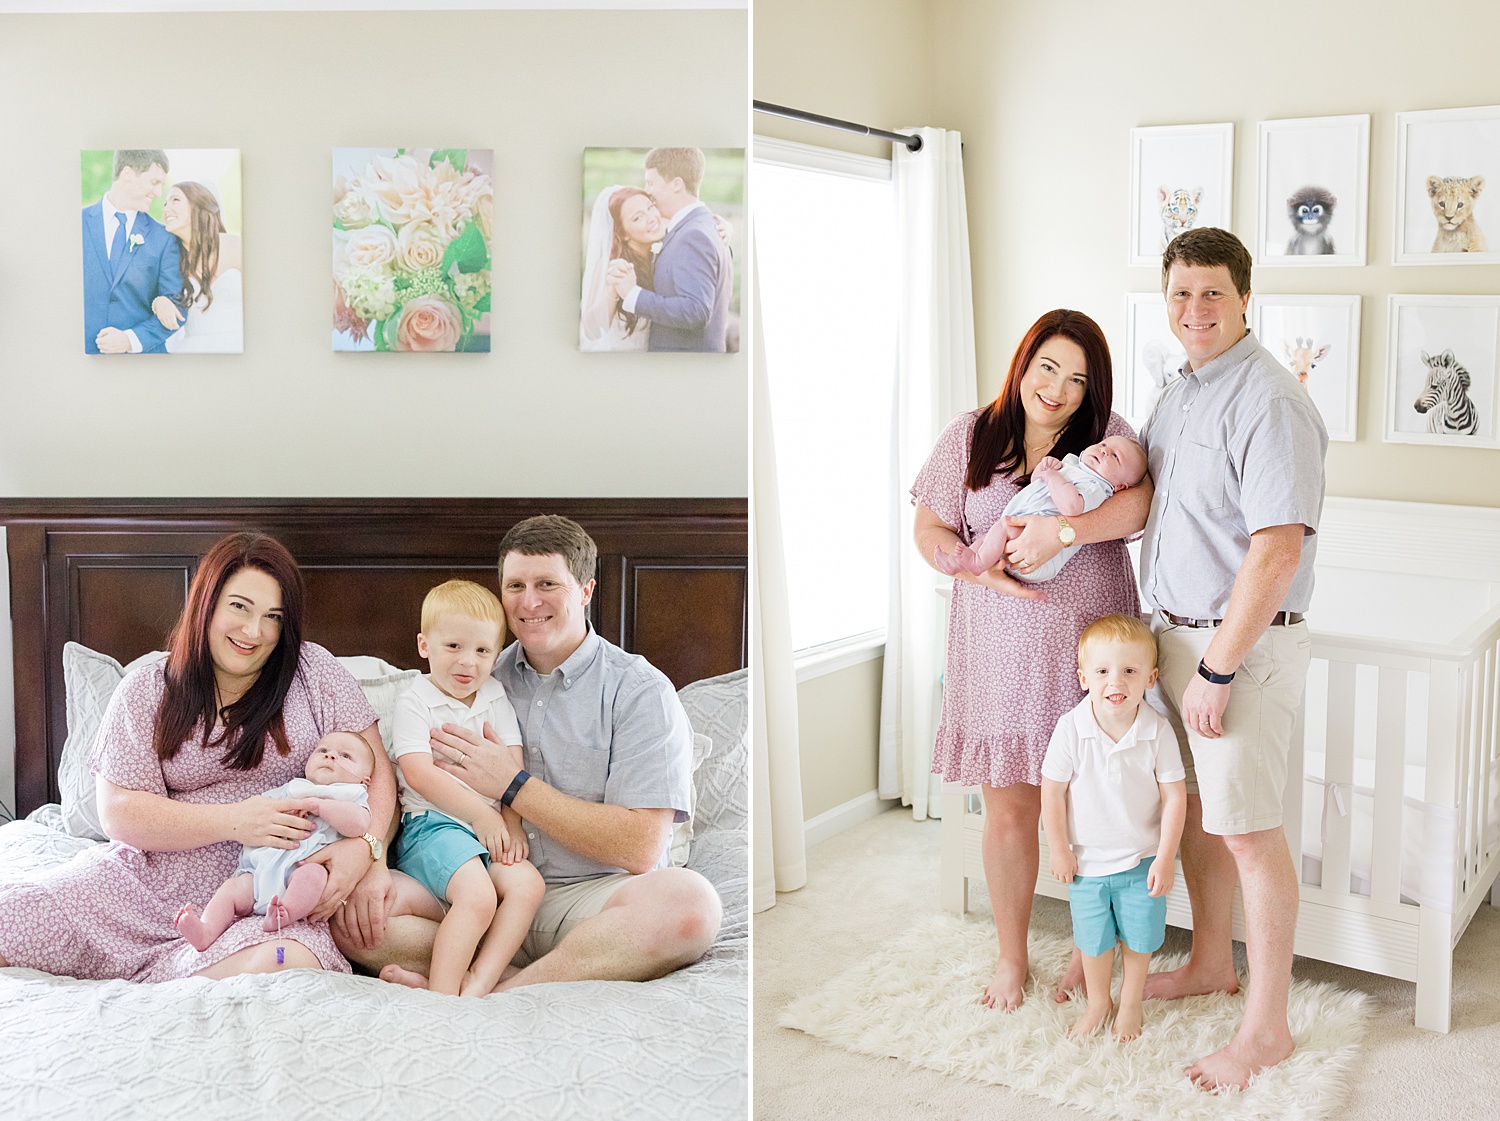 Intimate at-home Newborn + Family Session in Birimngham